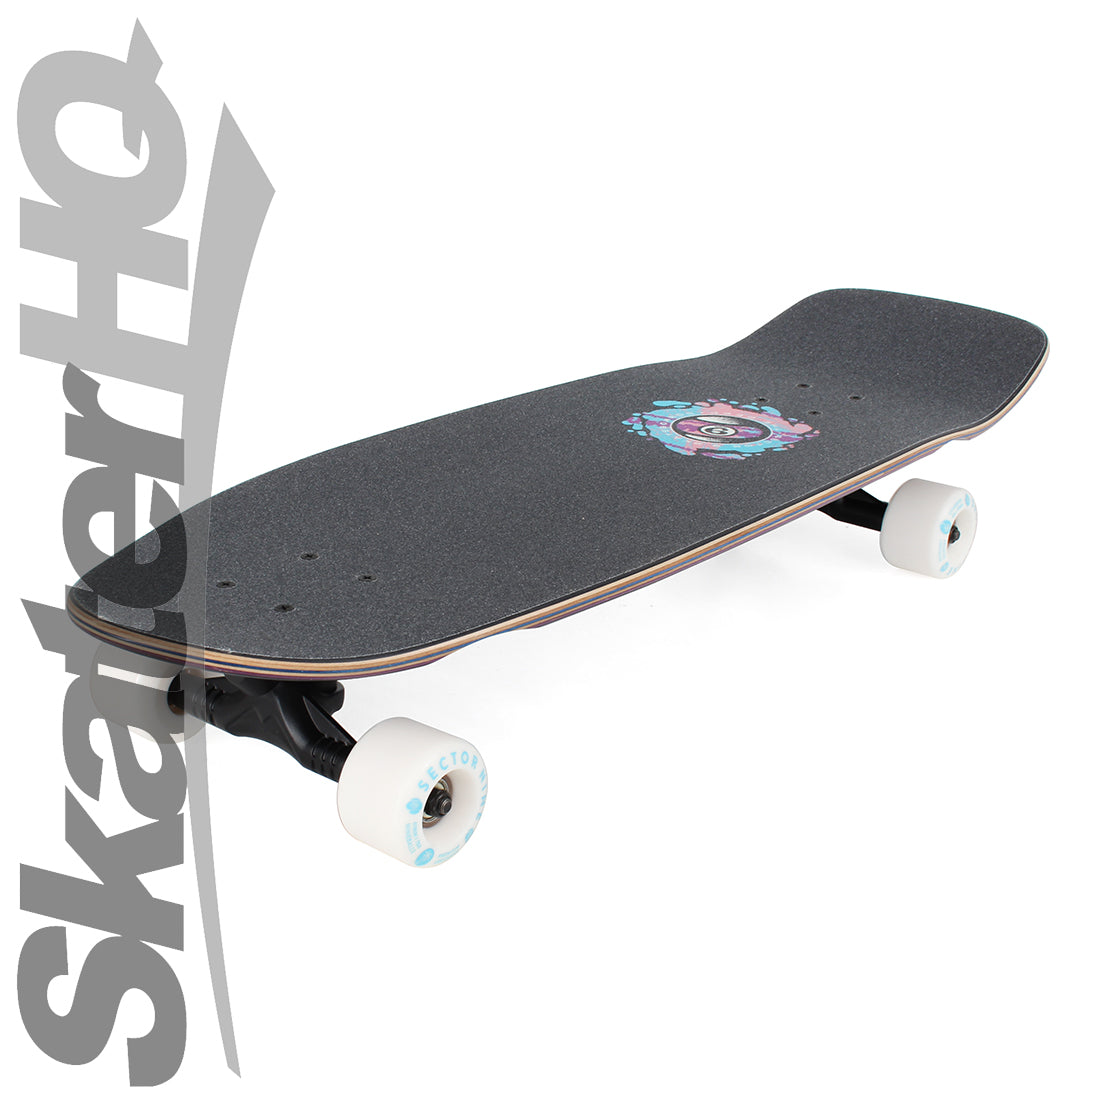 Sector 9 Fat Wave Fossil 30 Complete - Brown/Purple